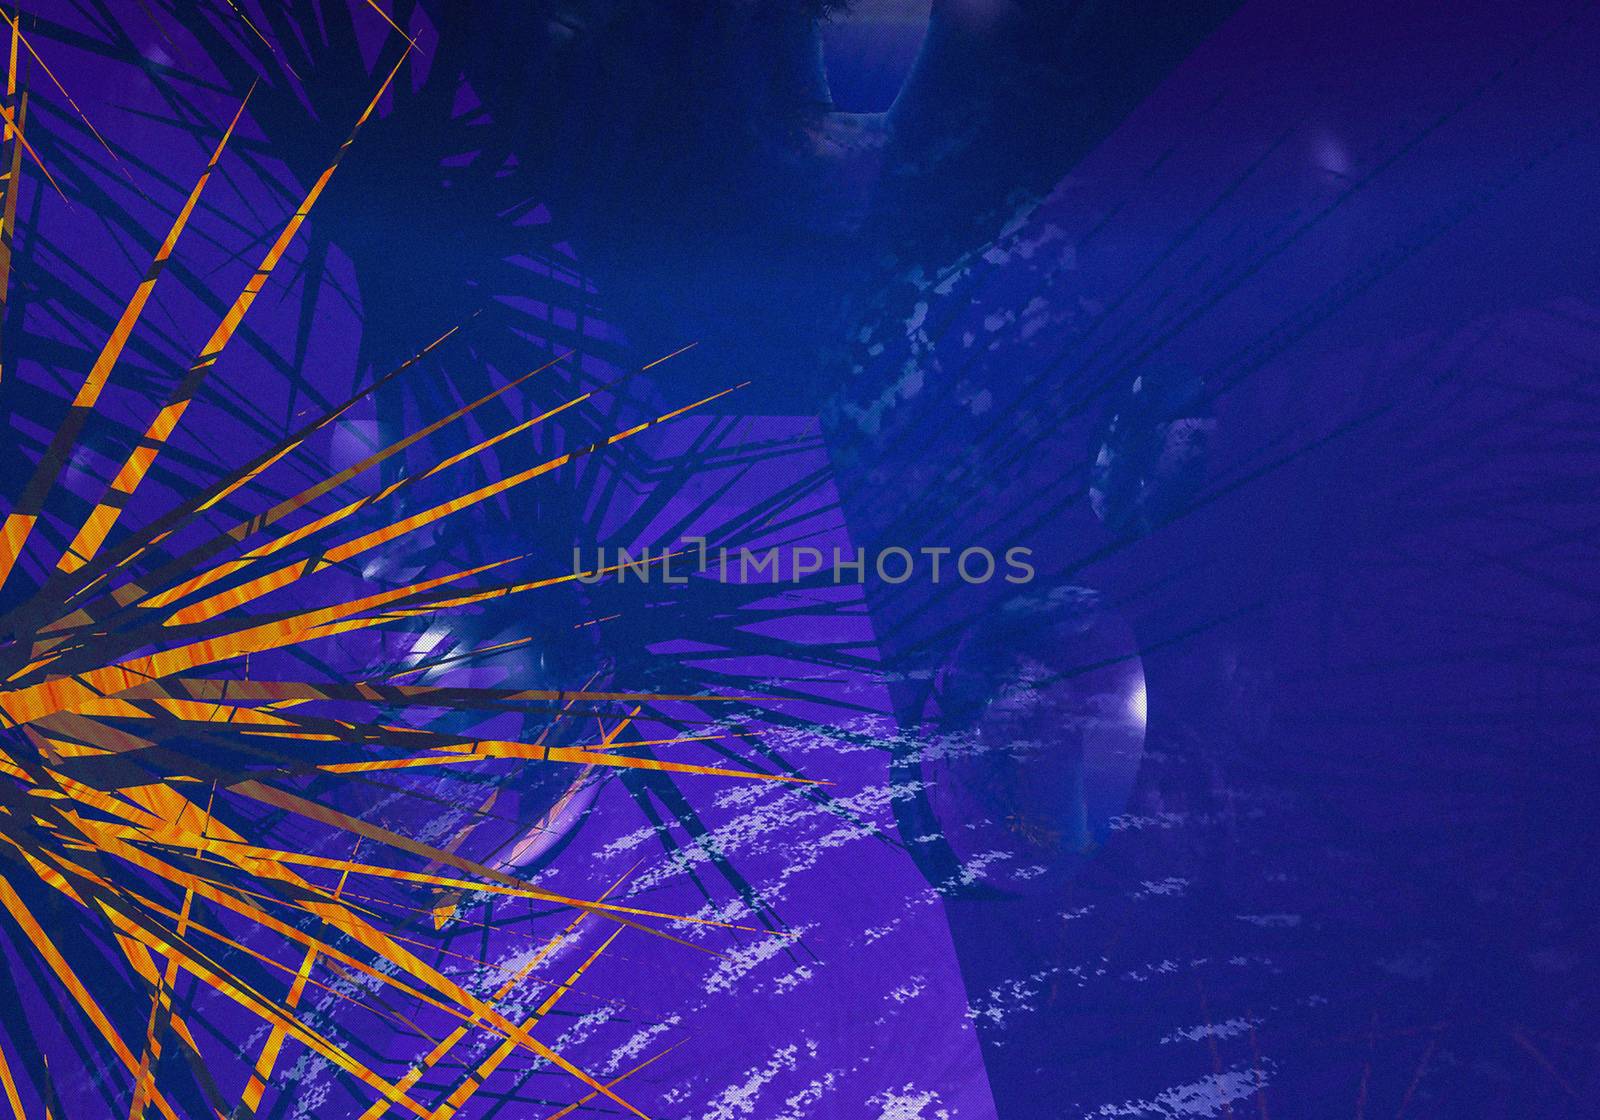 3d image of yellow spikes on blue background by creativ000creativ